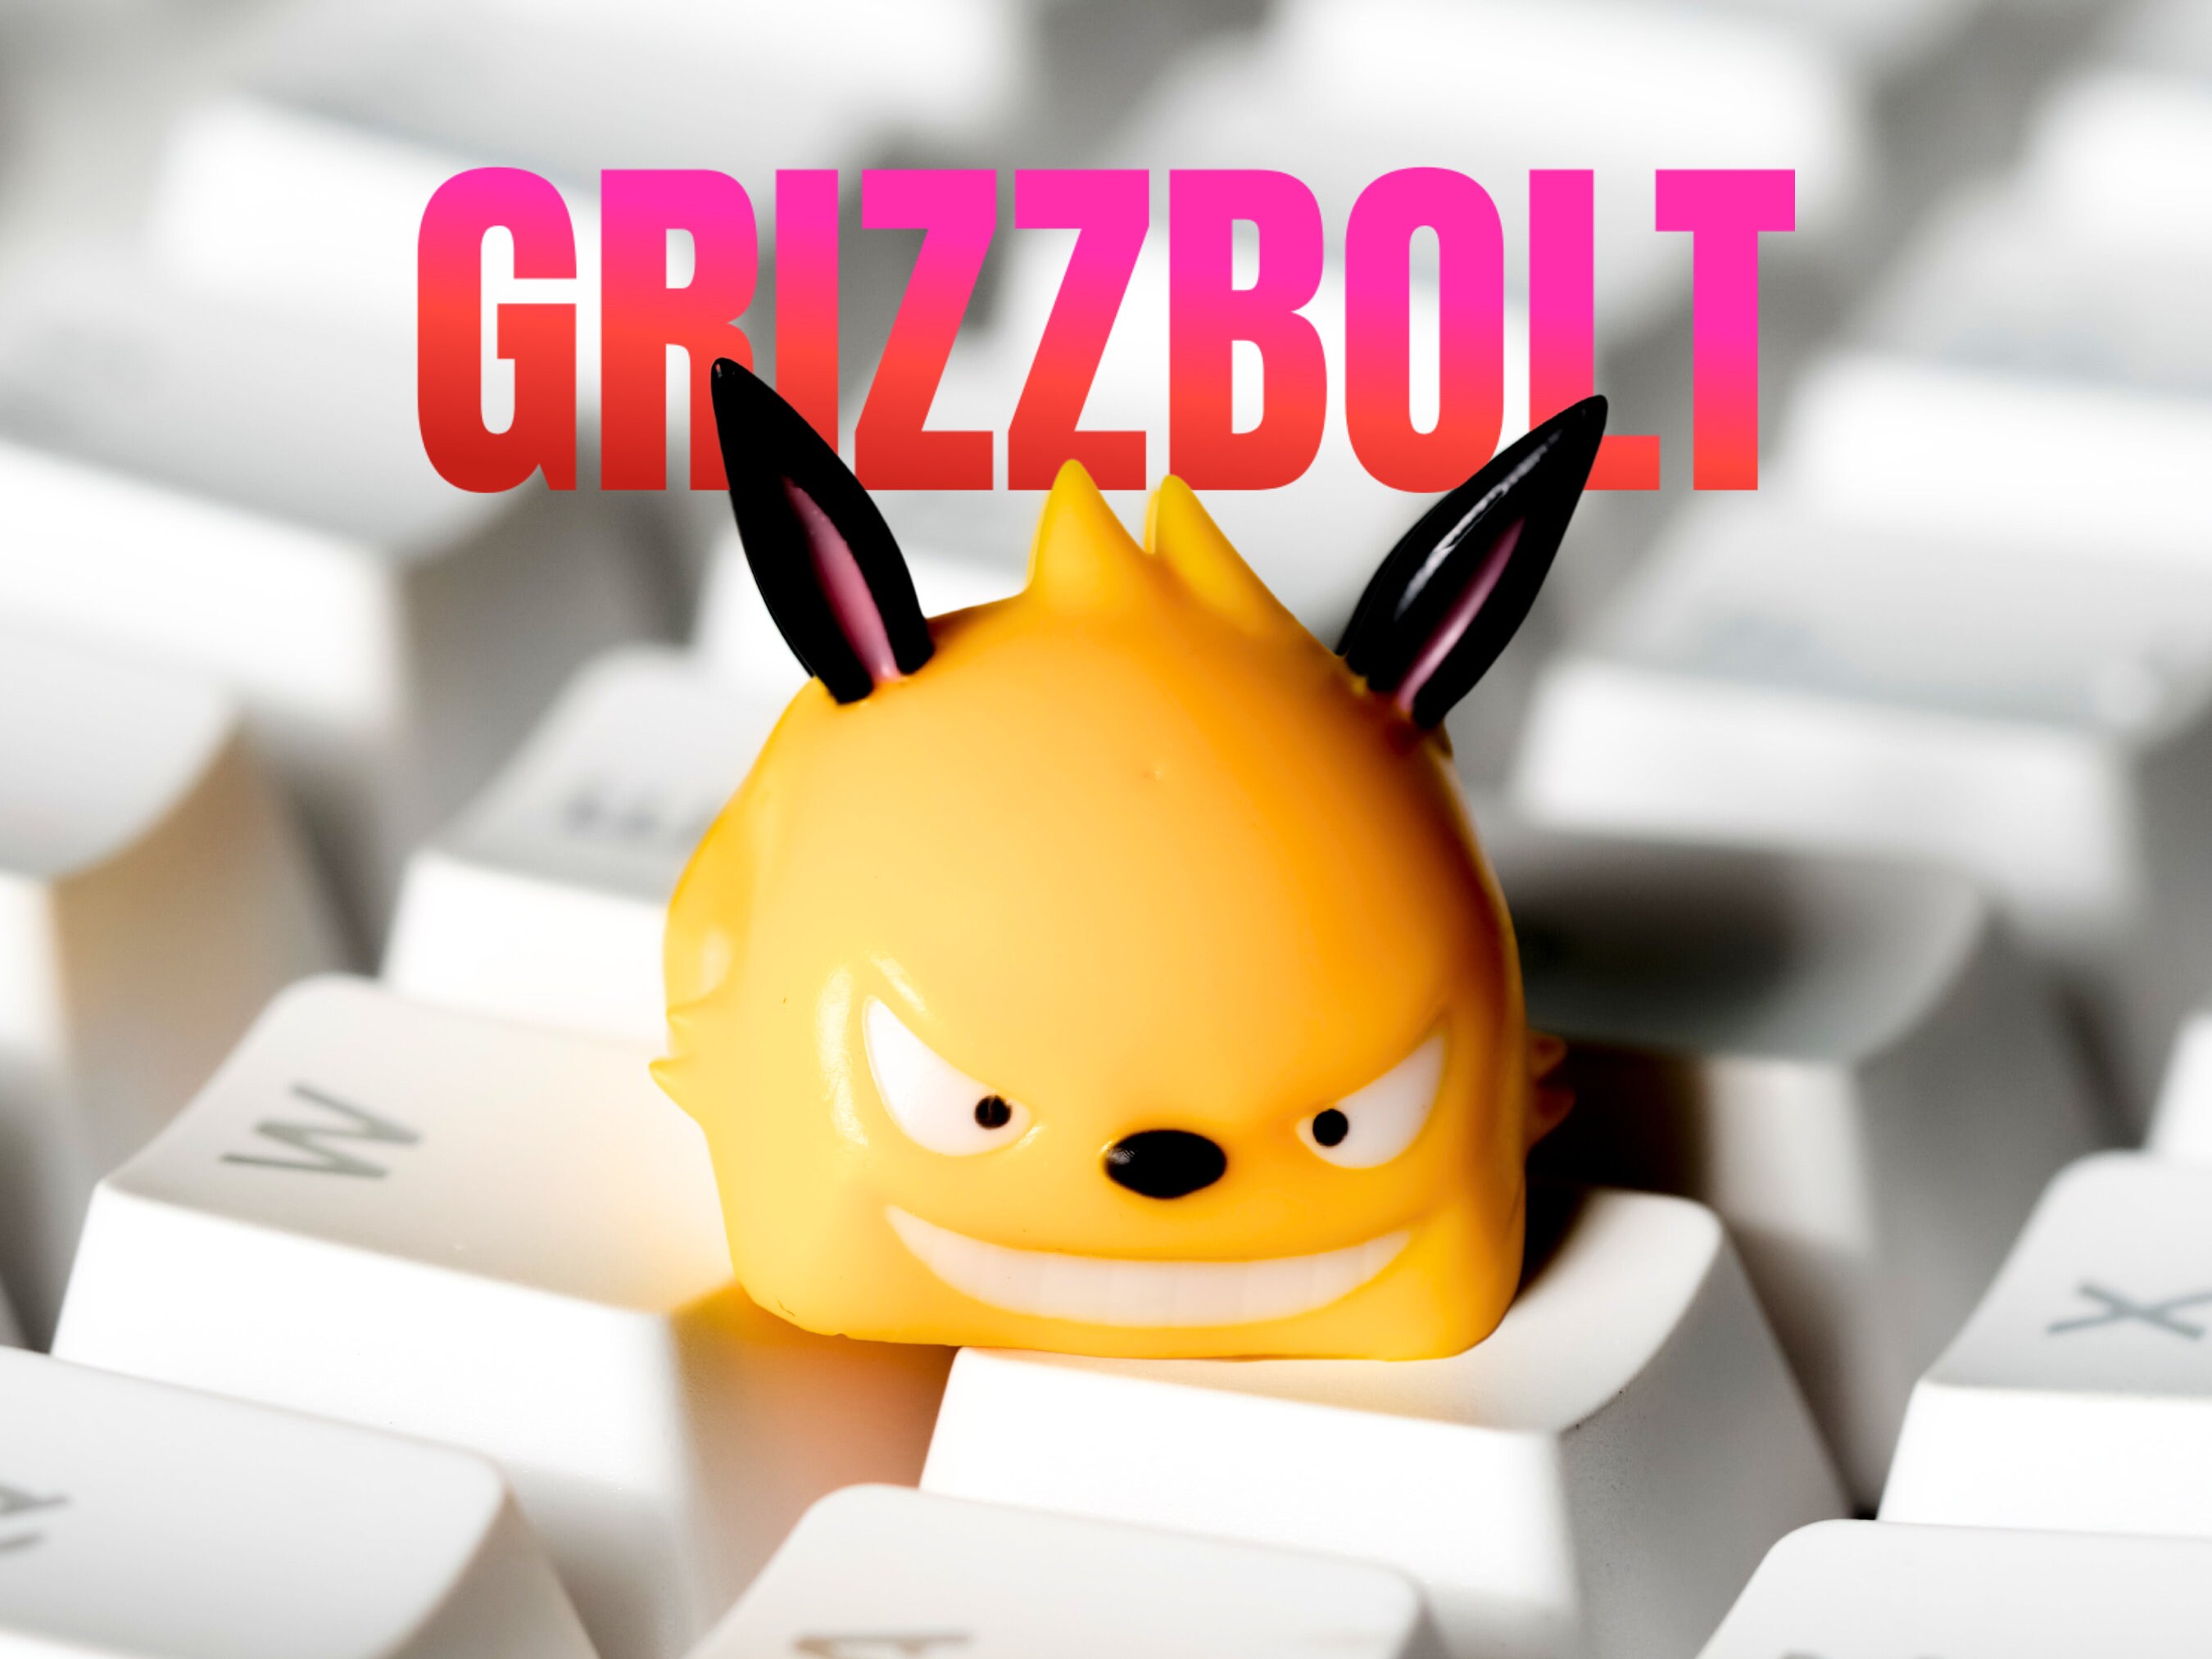 Grizzbolt Keycap, Palworld Keycap, Gaming Keycap, Keycap for Cherry MX Switches Mechanical Keyboard, Gift for him